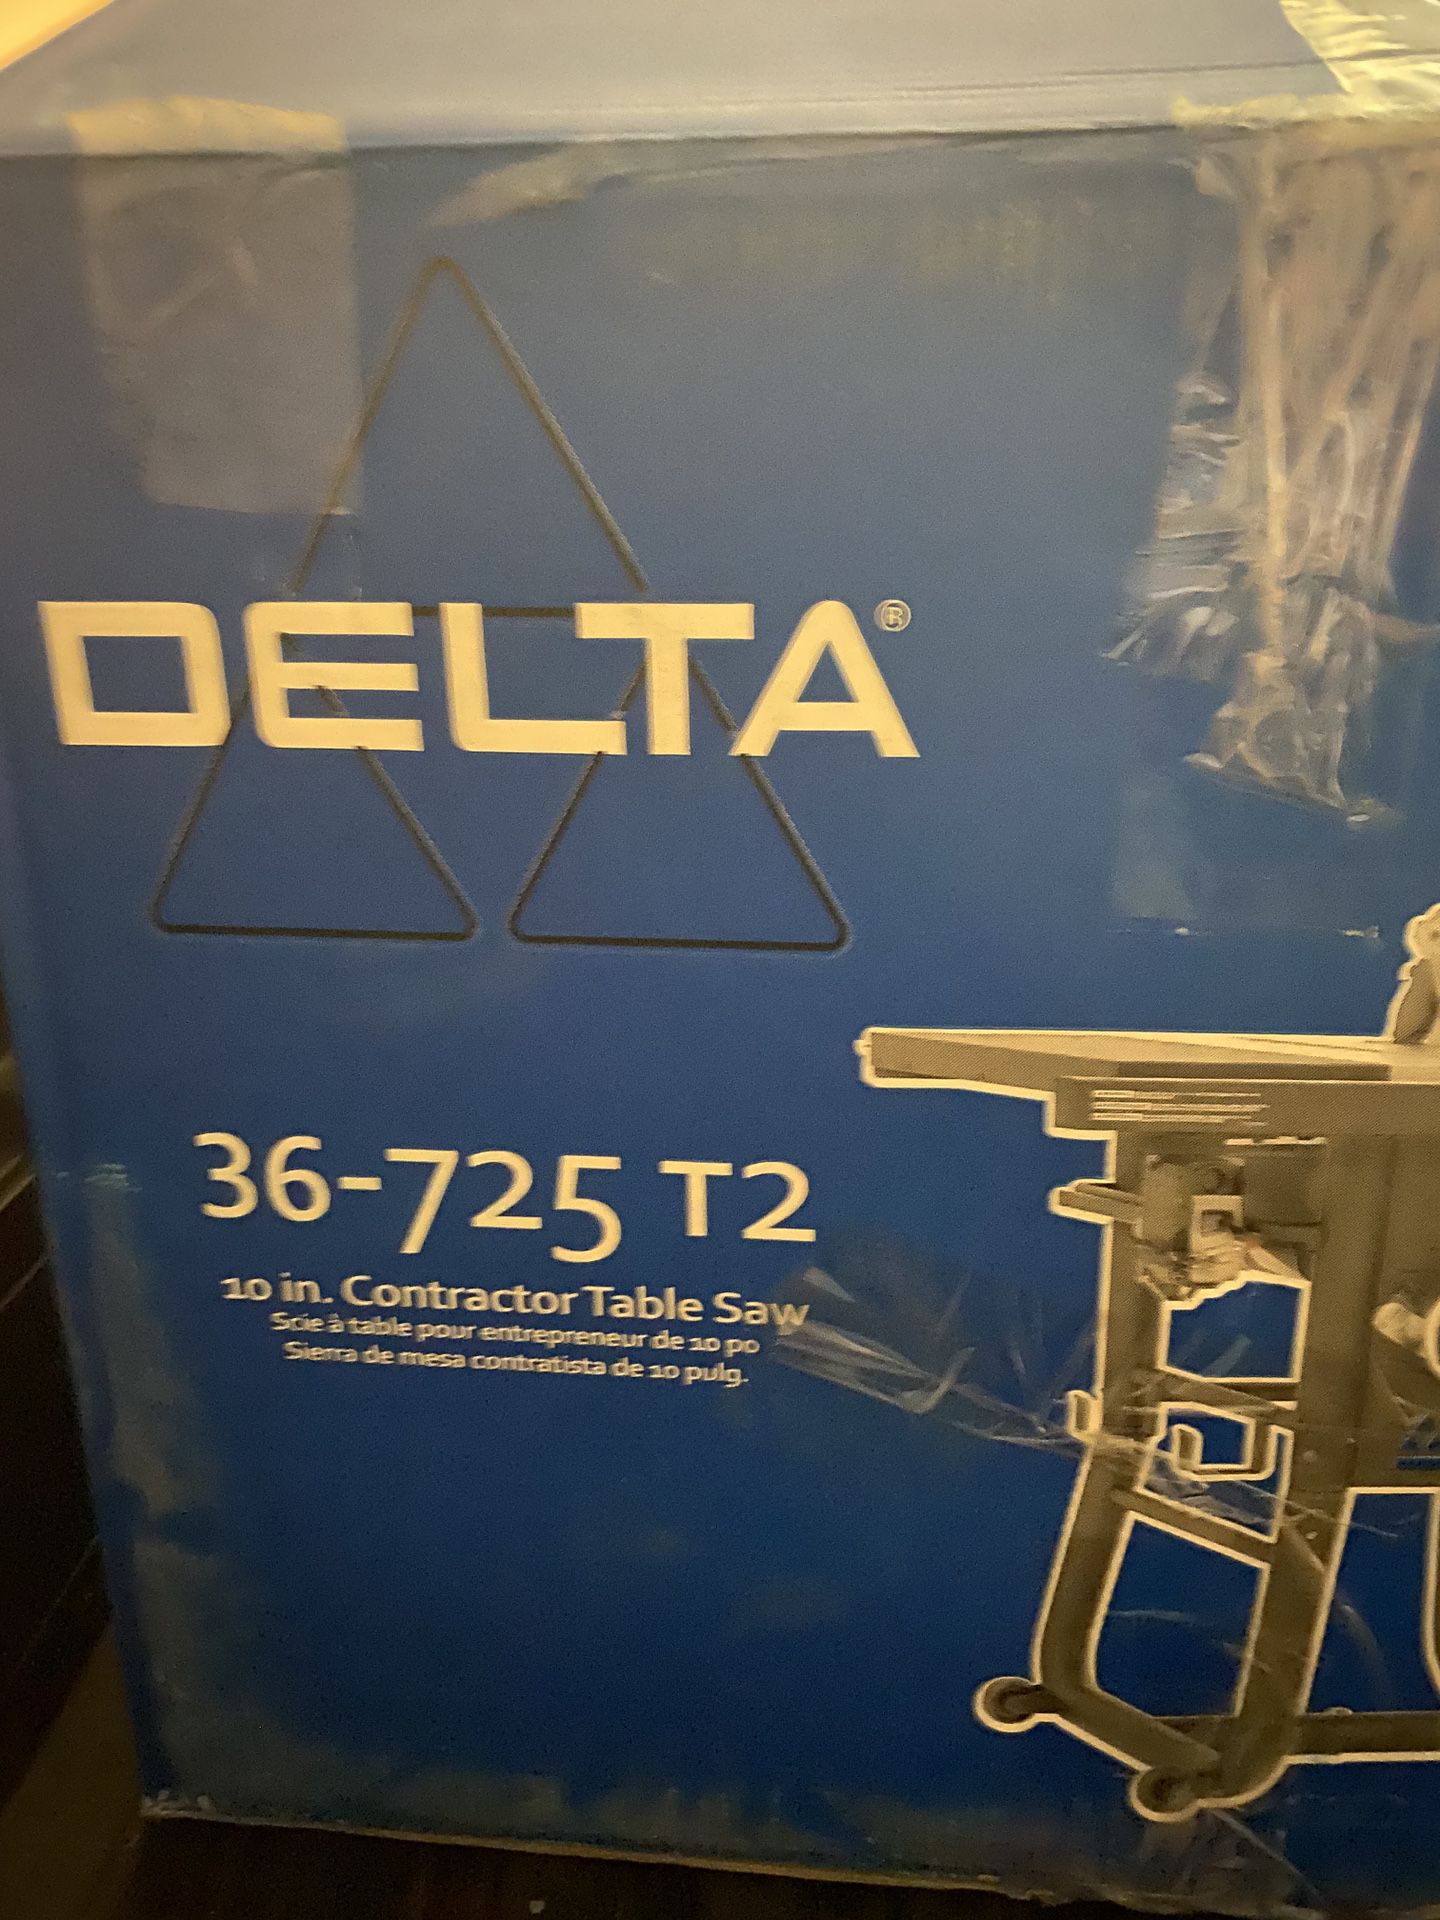 Delta Contractor Table Saw. Brand New